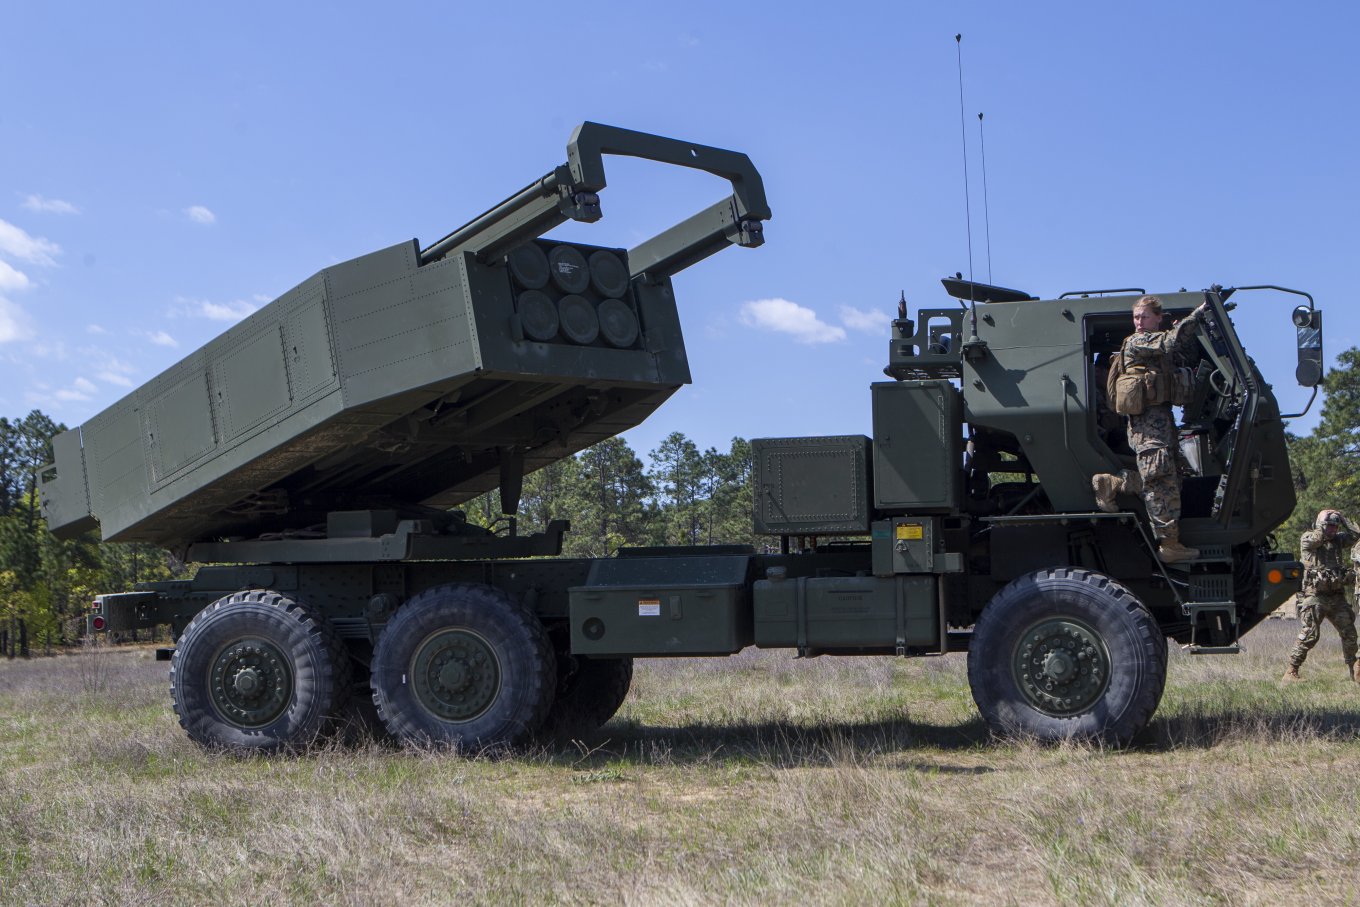 The M142 High Mobility Artillery Rocket System Defense Express The U.S. Plans Double or Triple HIMARS, GMLRS, ATGM and MPADS Production in a Year